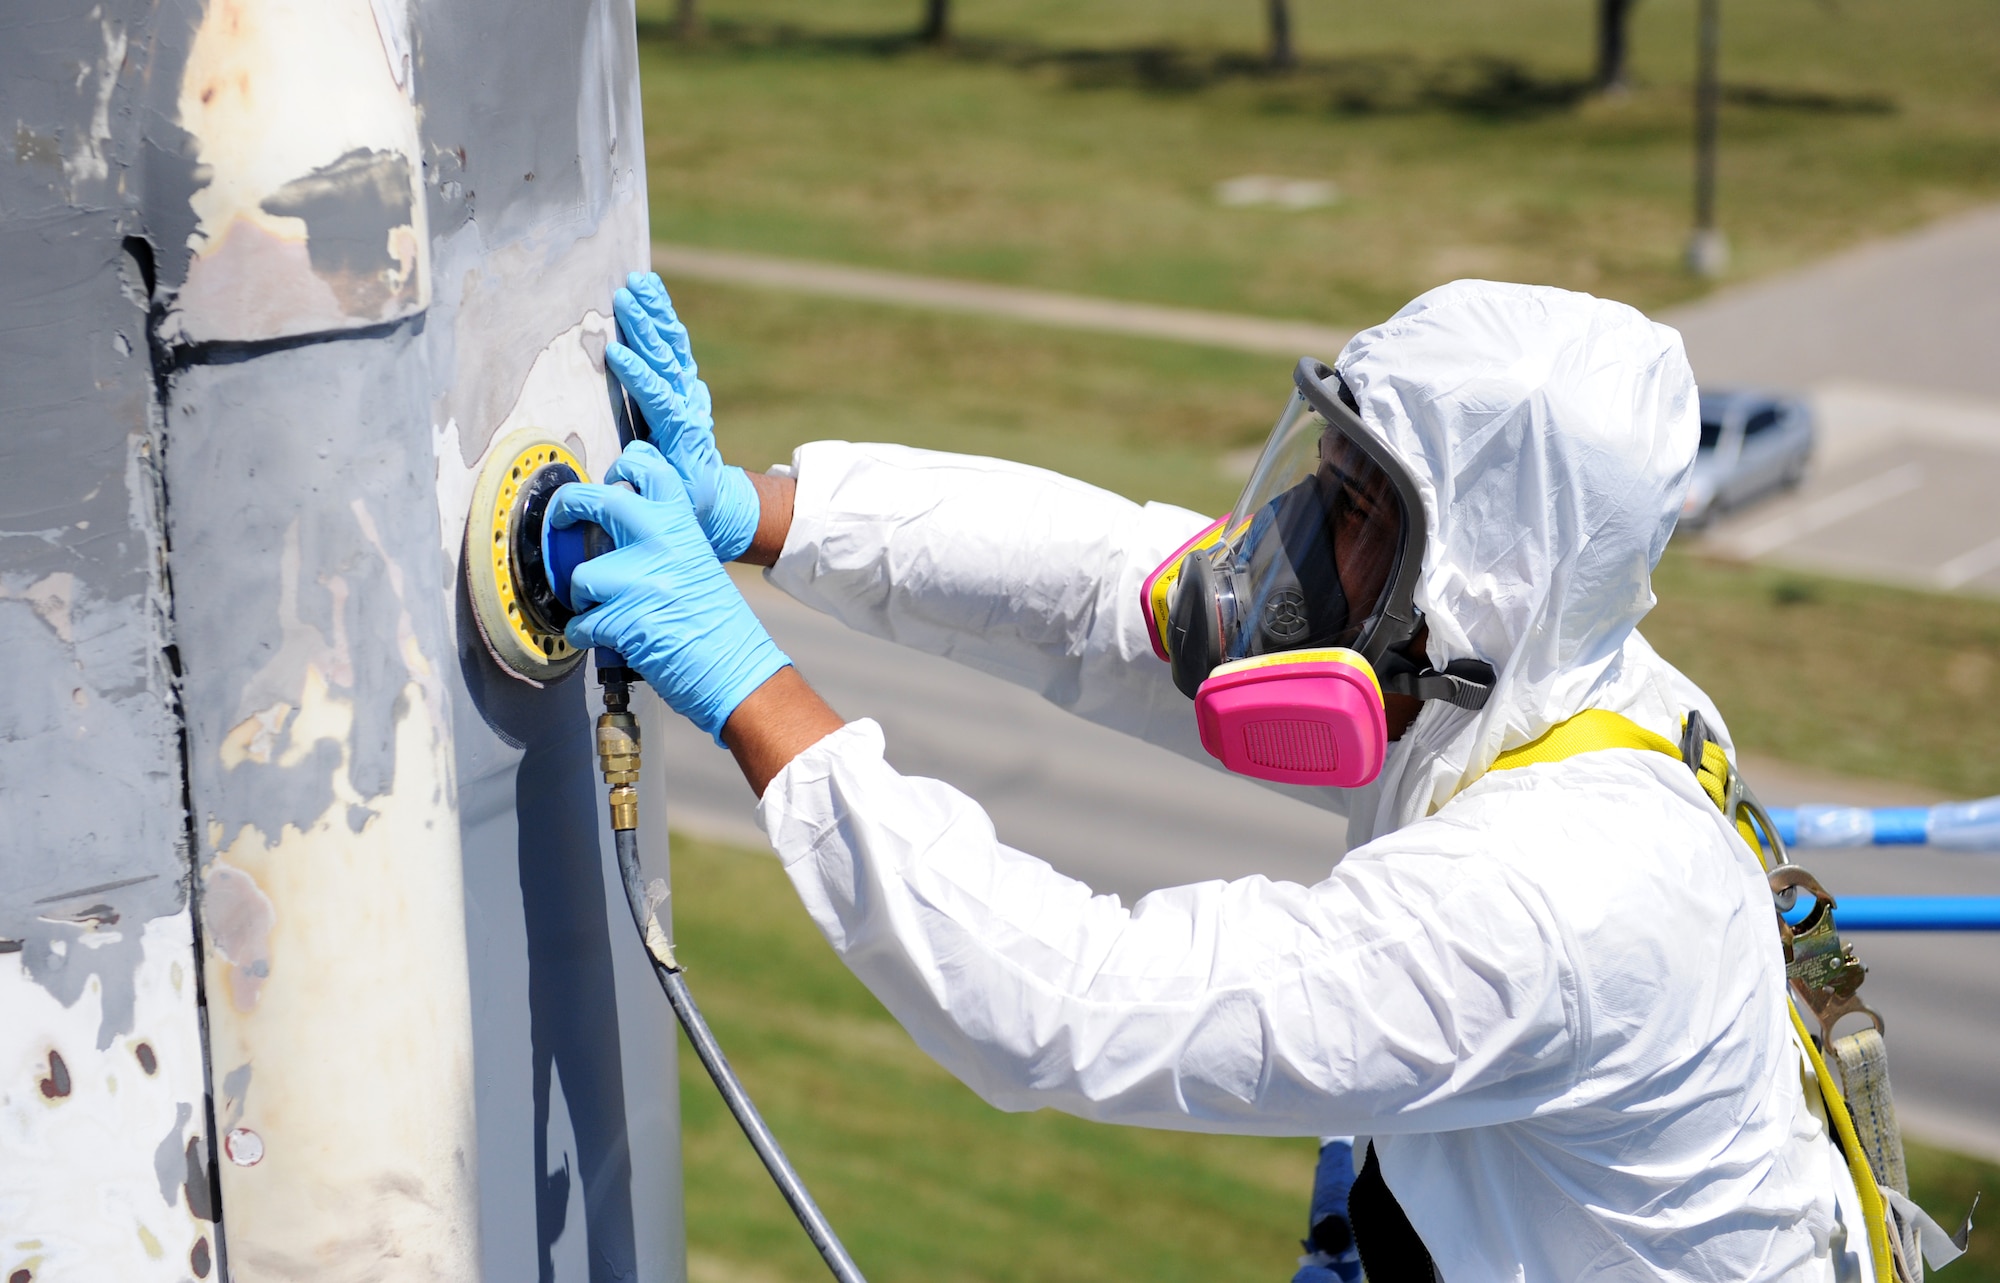 Senior Airman Carlos Colon, 509th Maintenance Squadron low observable technician, sands a Minuteman II Missile static display at Whiteman Air Force Base, Mo., Aug. 21, 2015. The missile was sanded, primed and then painted as part of the restoration process. (U.S. Air Force photo by Airman 1st Class Michaela R. Slanchik/Released)